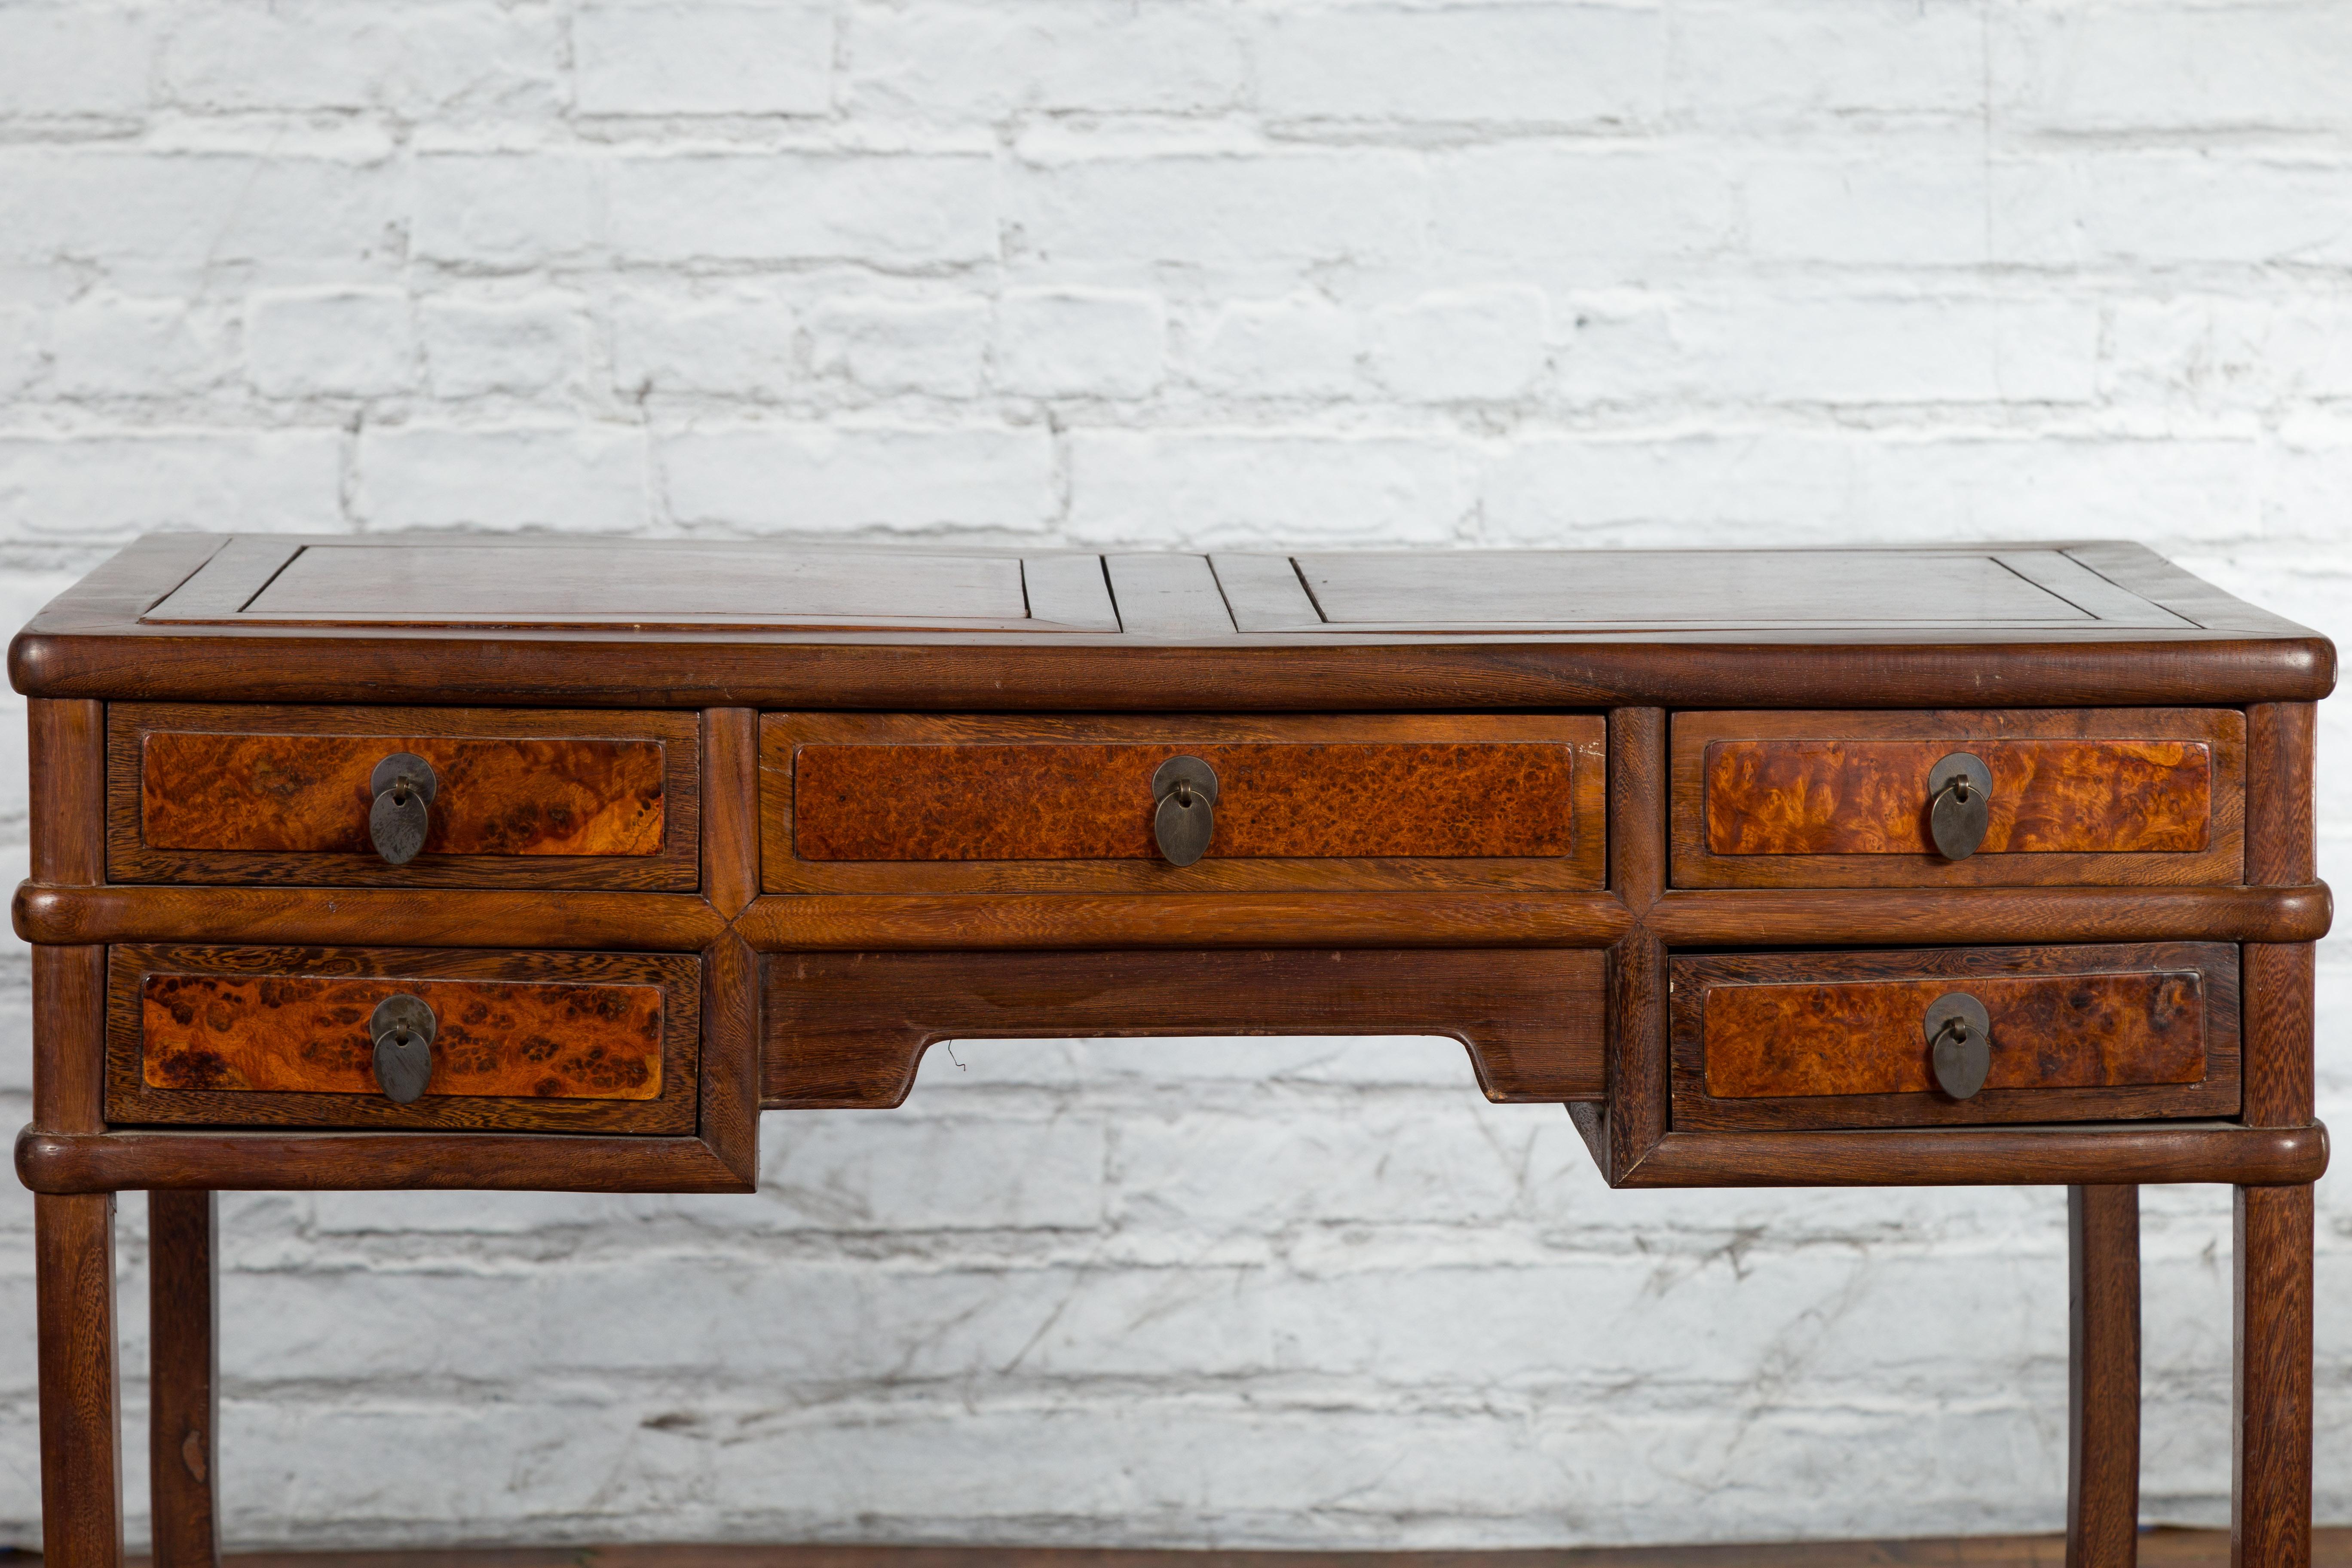 Wood Qing Dynasty 19th Century Desk with Burlwood Top, Drawers and Cracked Ice Shelf For Sale